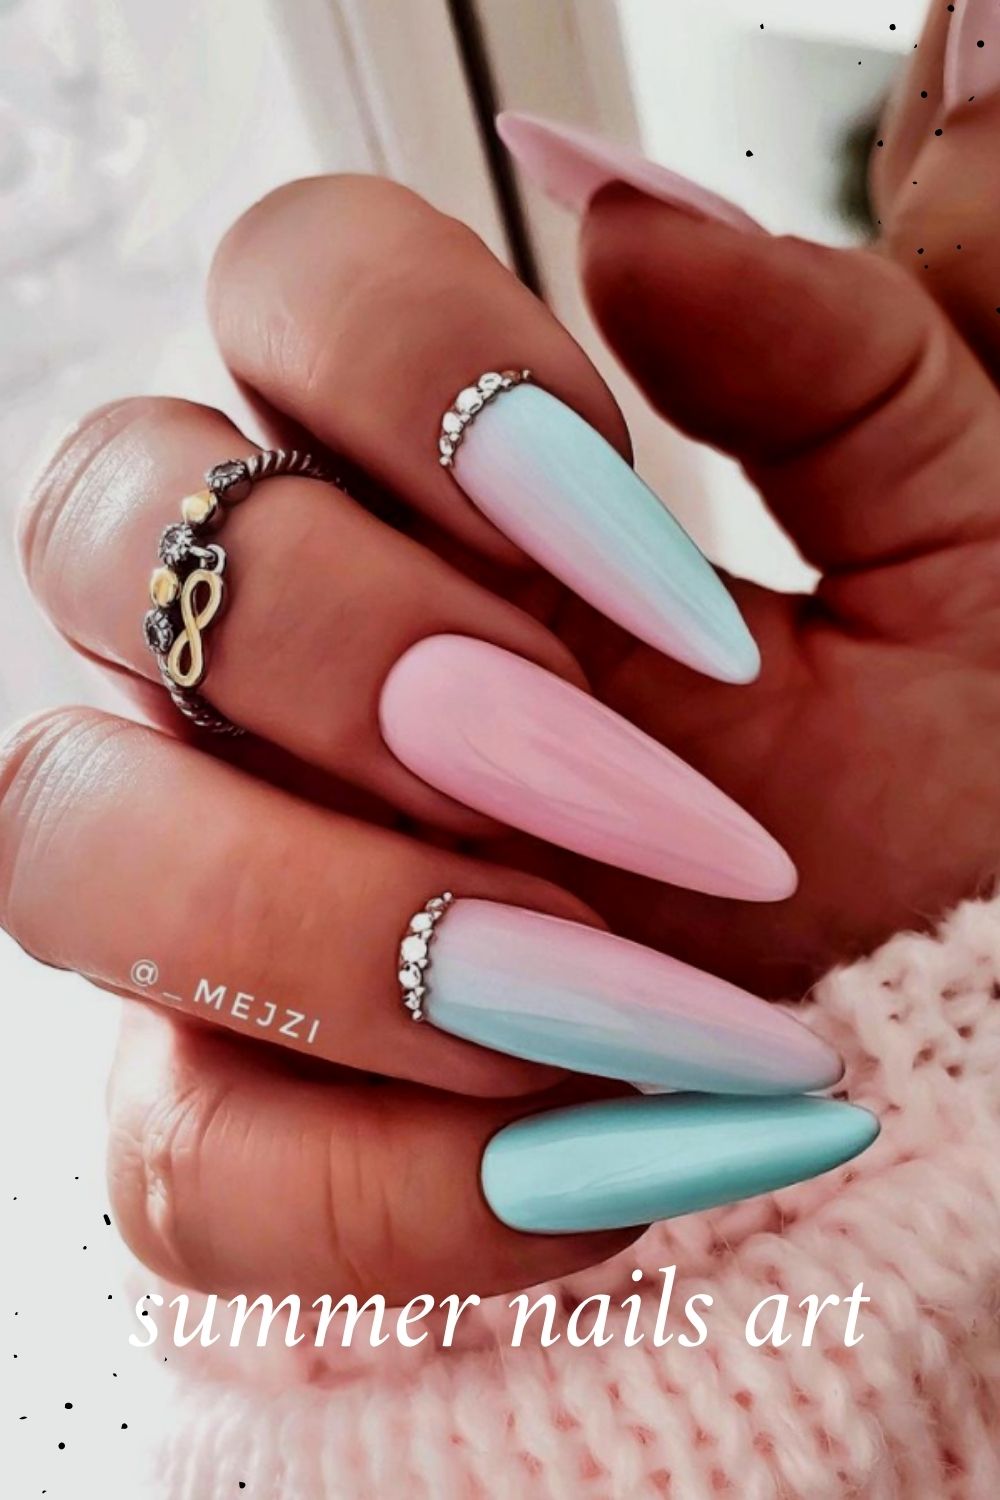 blue and pink nails art